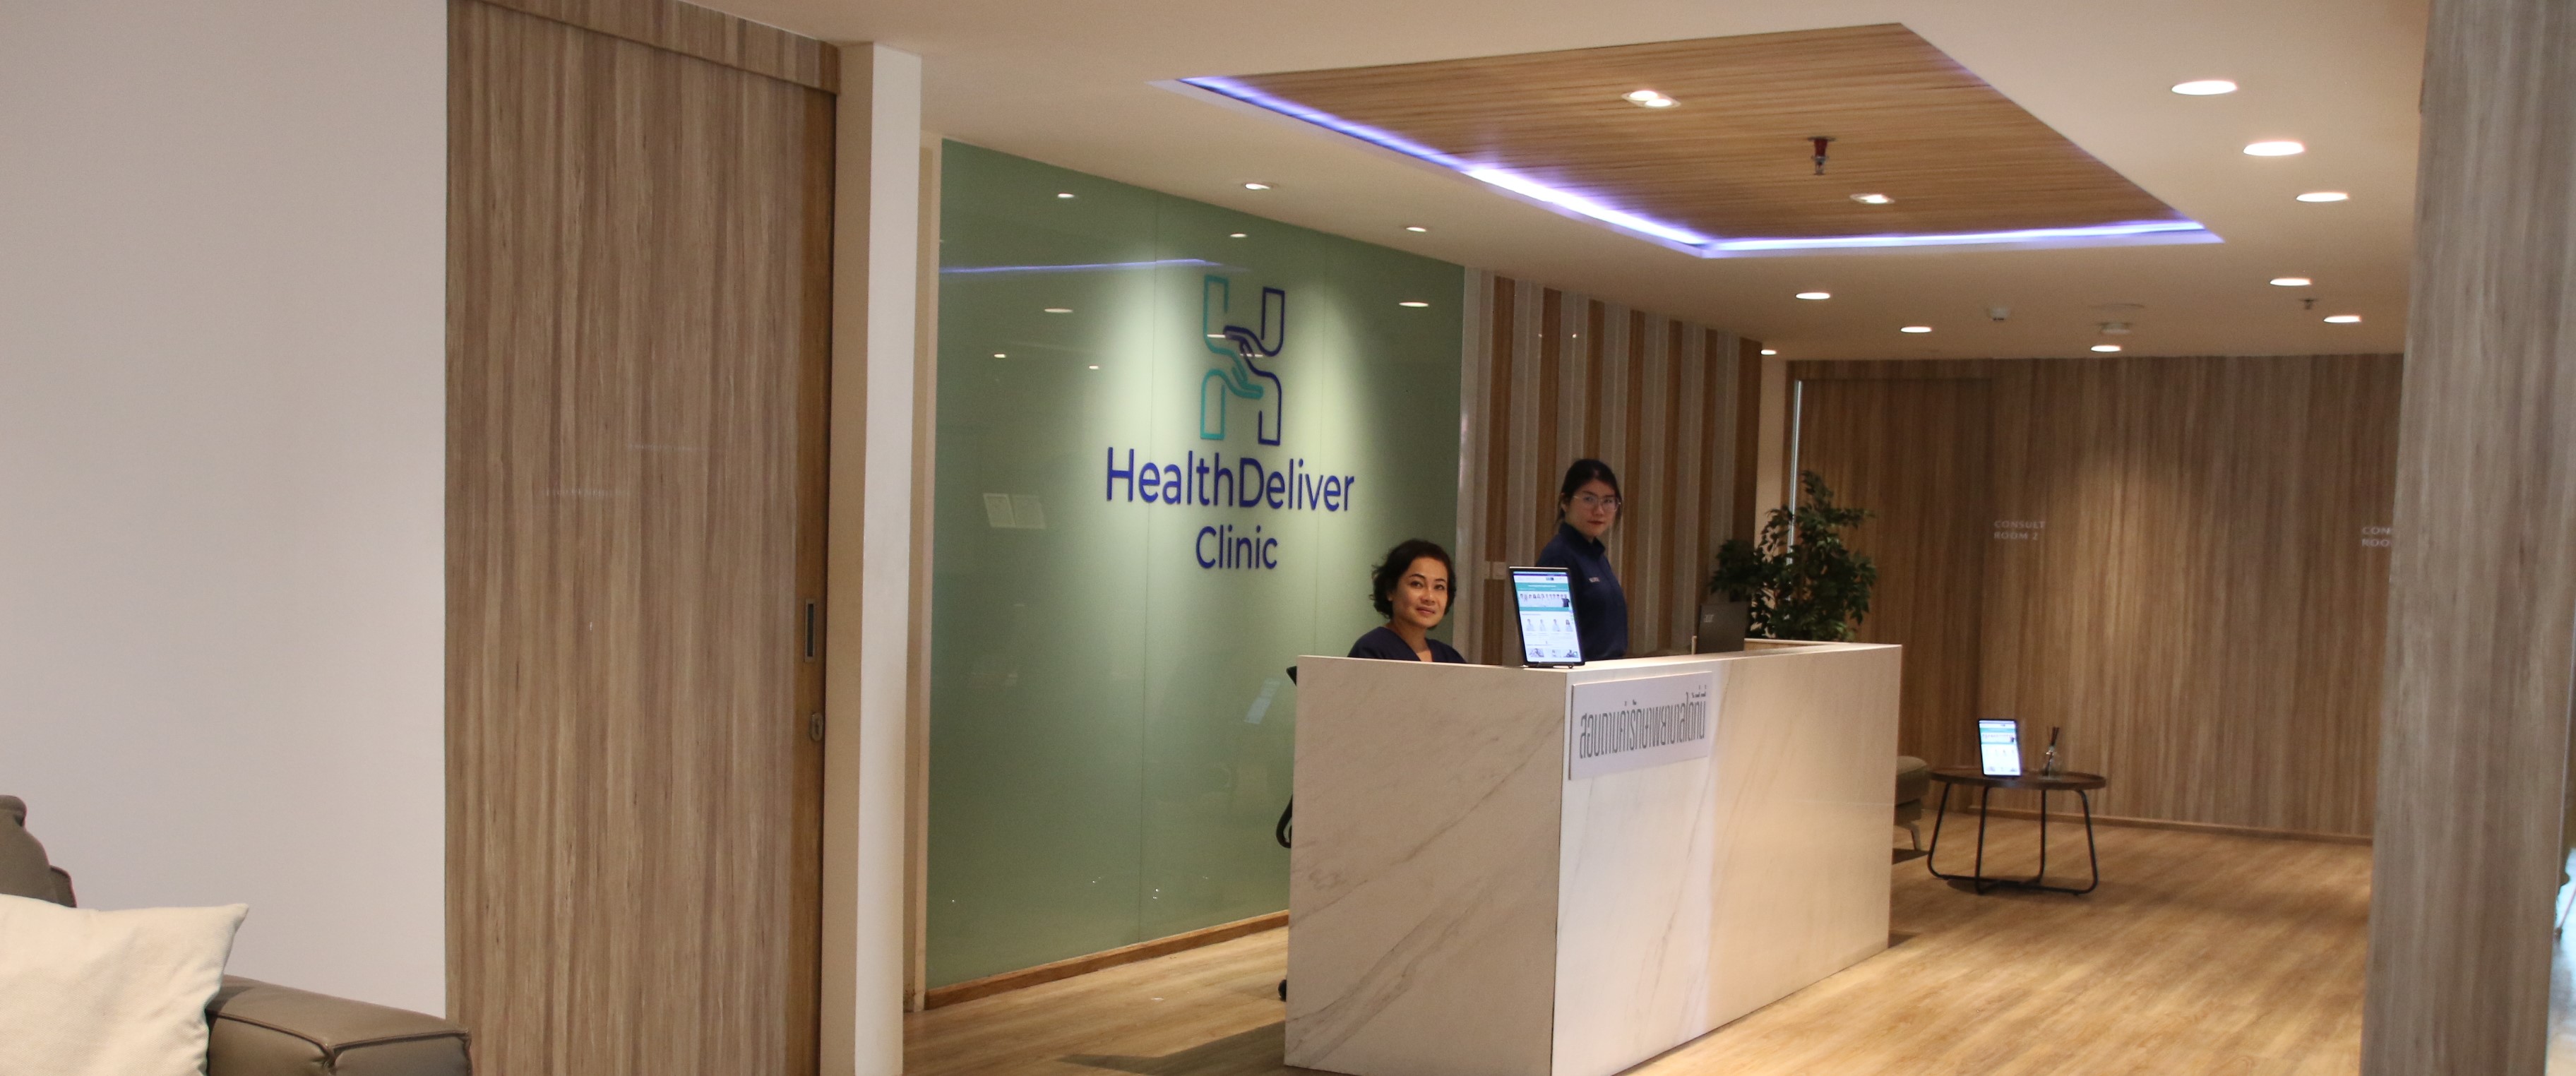 HealthDeliver Announces Grand Opening of New Physical Clinic in Bangkok: HealthDeliver Clinic